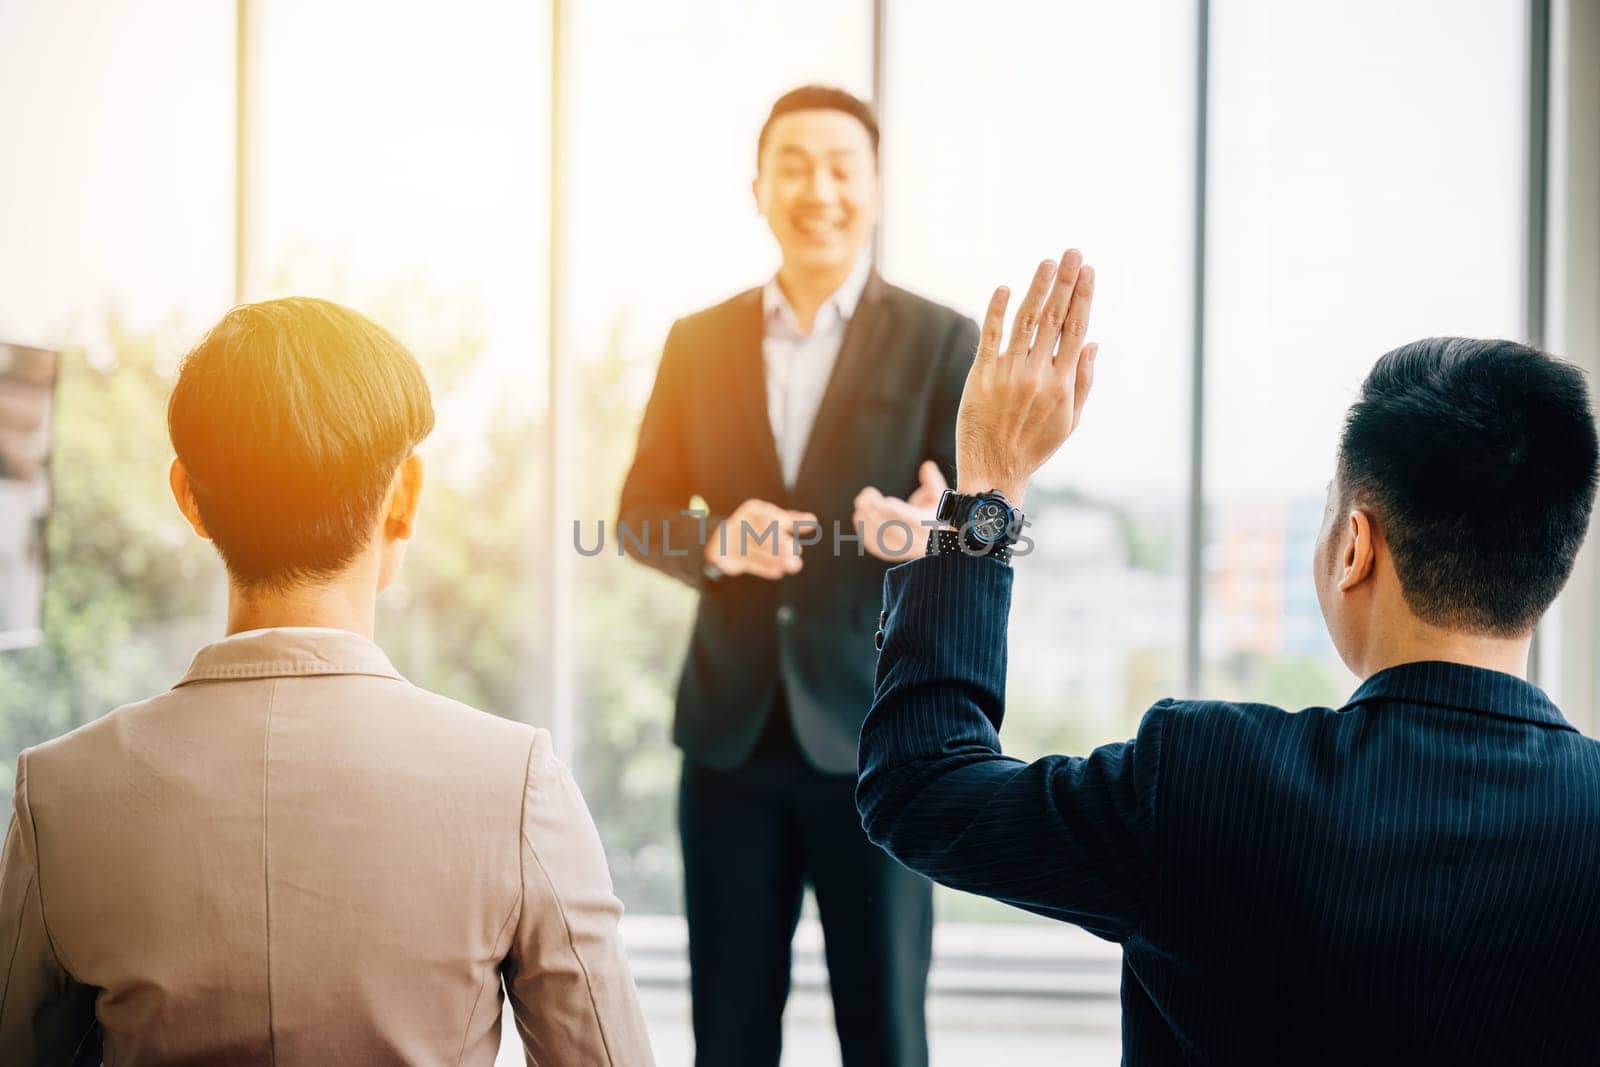 In a conference, business professionals raise their hands to ask questions, vote, or volunteer, reflecting audience engagement and effective teamwork in a corporate setting. by Sorapop